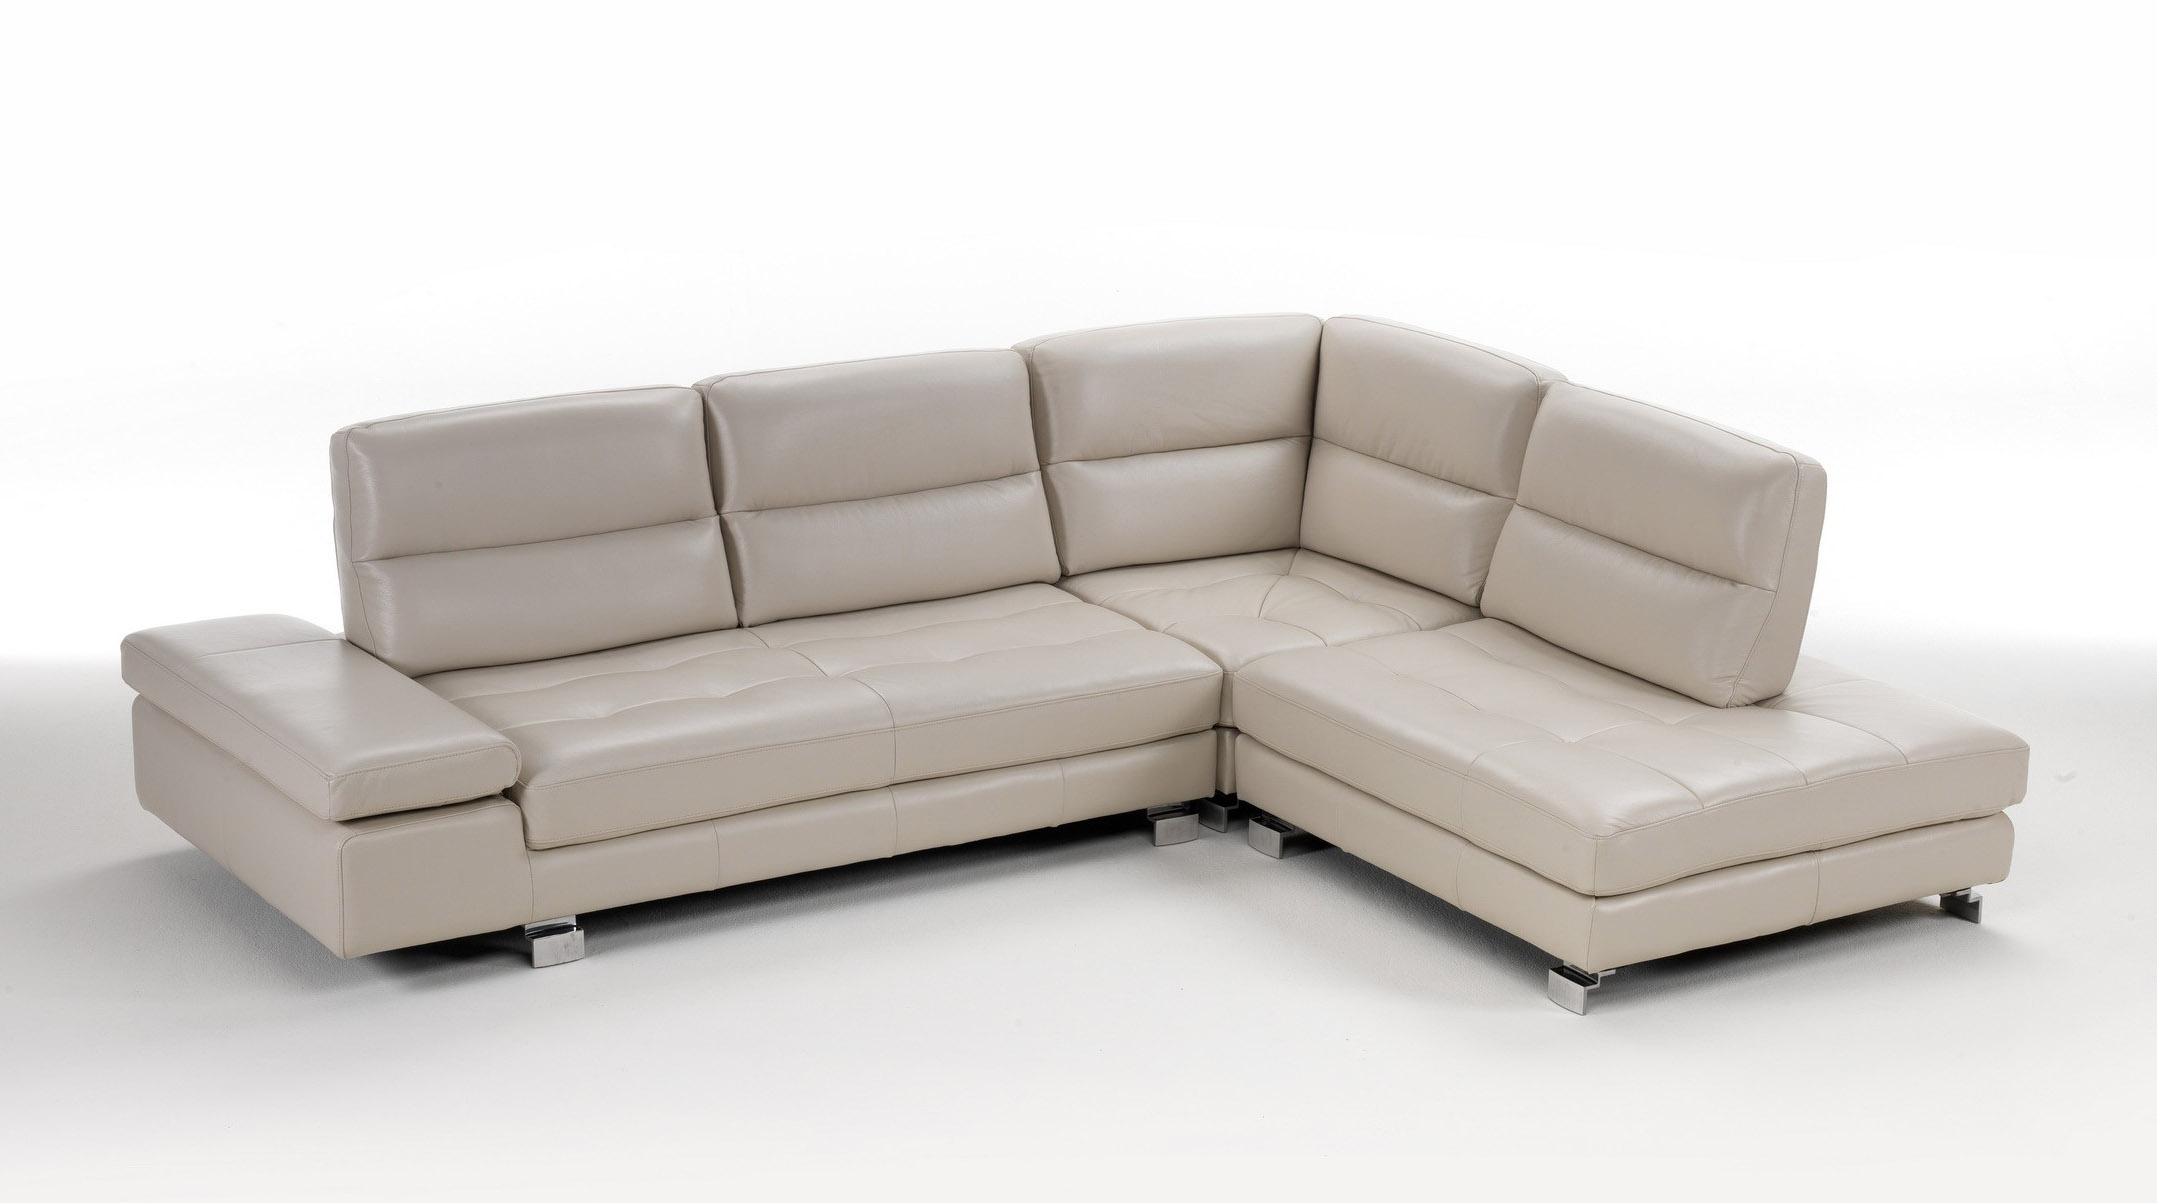 Overnice Tufted Leather Corner Sectional Sofa with Adjustable Backs - Click Image to Close